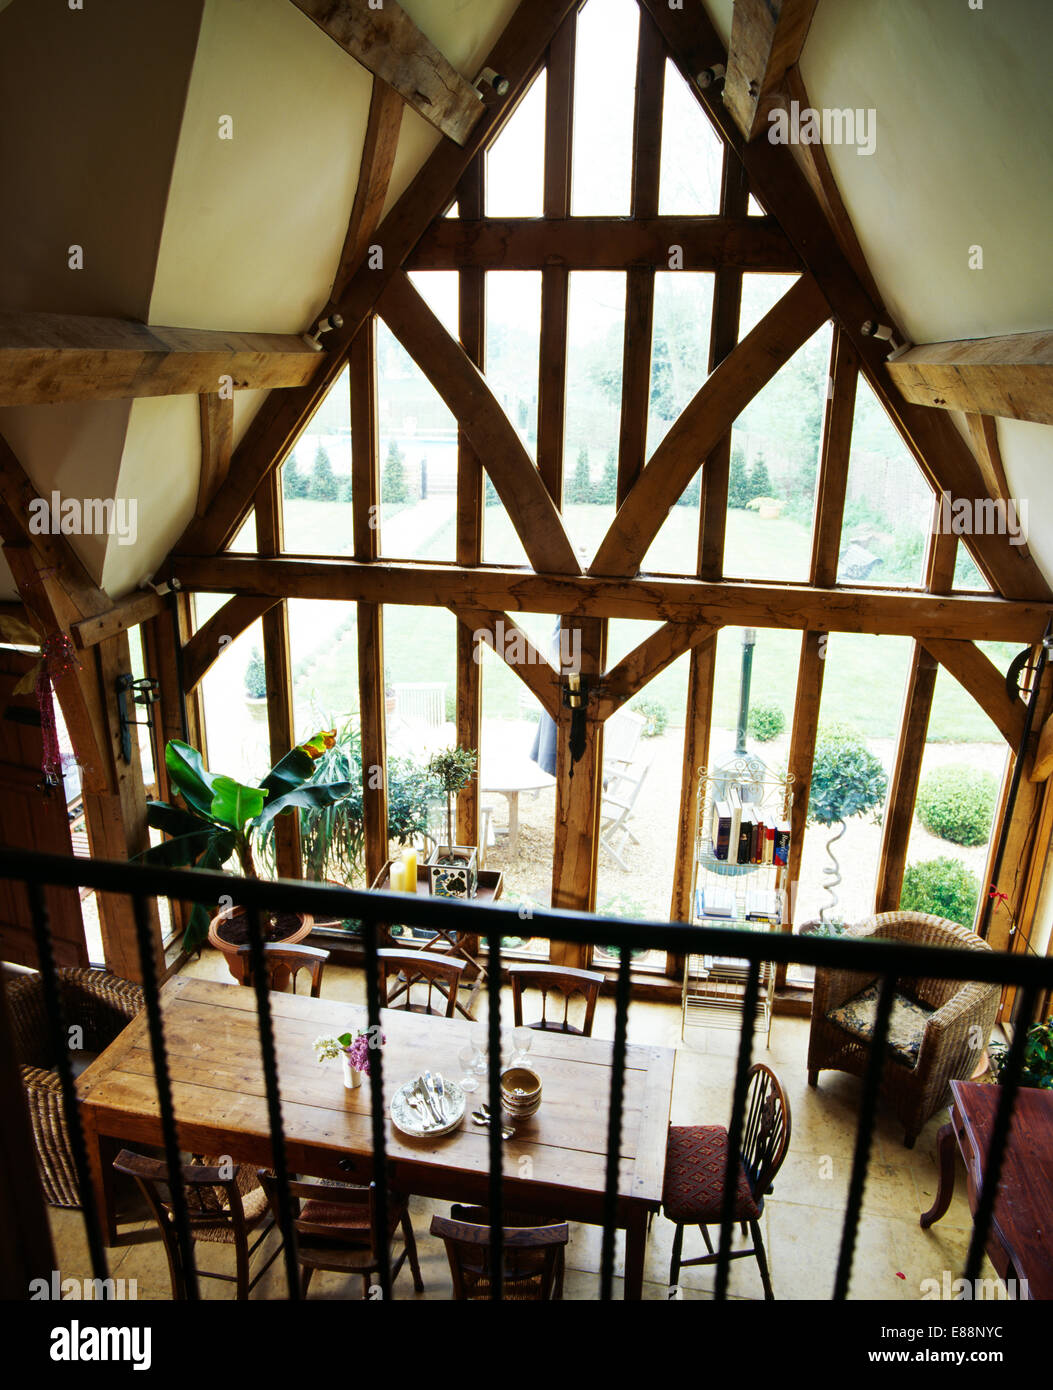 Birdseye view of antique wooden table in barn conversion dining room with large floor-to-ceiling apex window Stock Photo